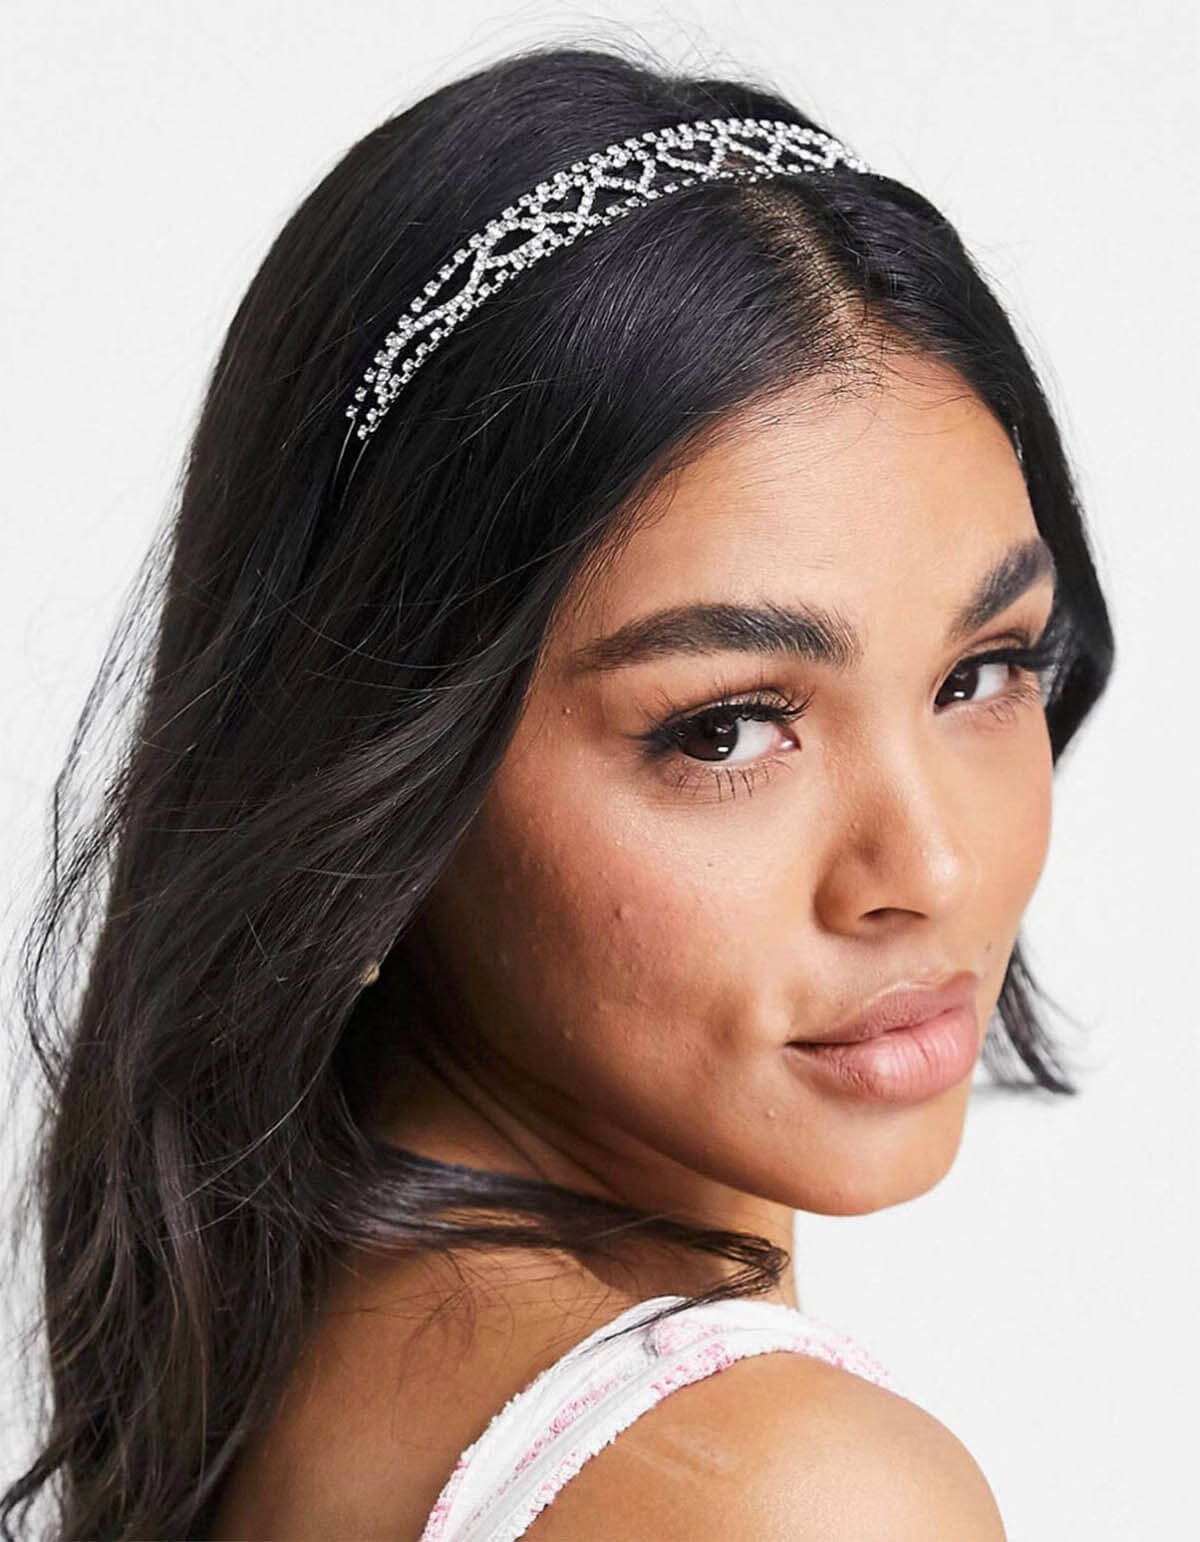 35 Hair accessories for wedding guests